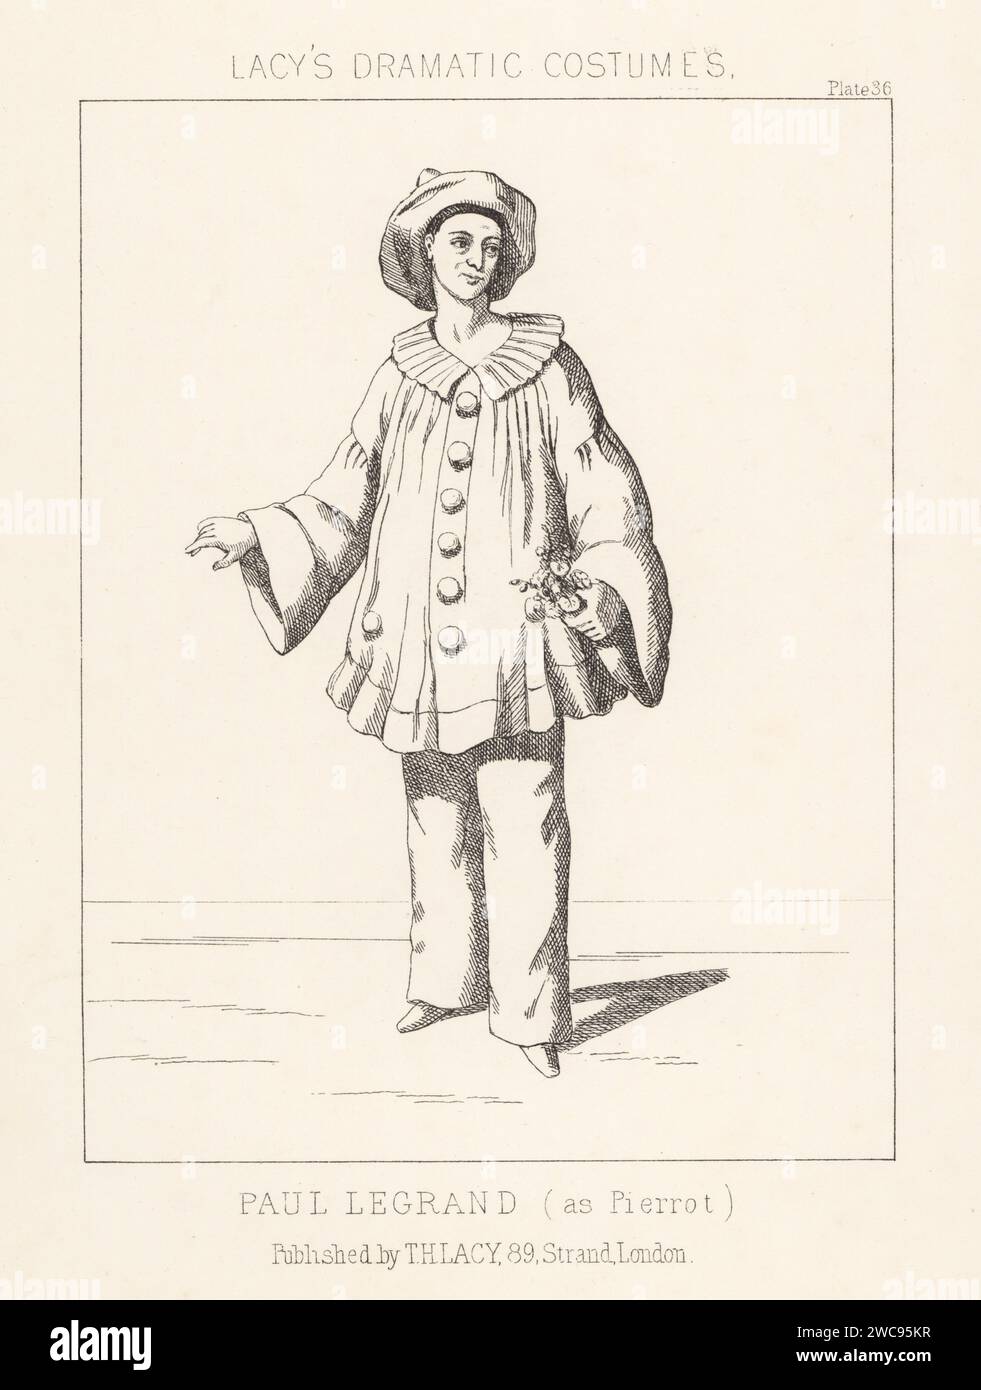 Paul Legrand, French mime, 1816-1898, in costume of his greatest role, Pierrot, commedia dell'arte. White hat, white tunic with large buttons and collar, pants. Lithograph from Thomas Hailes Lacy's Male Costumes, Historical, National and Dramatic in 200 Plates, London, 1865. Lacy (1809-1873) was a British actor, playwright, theatrical manager and publisher. Stock Photo